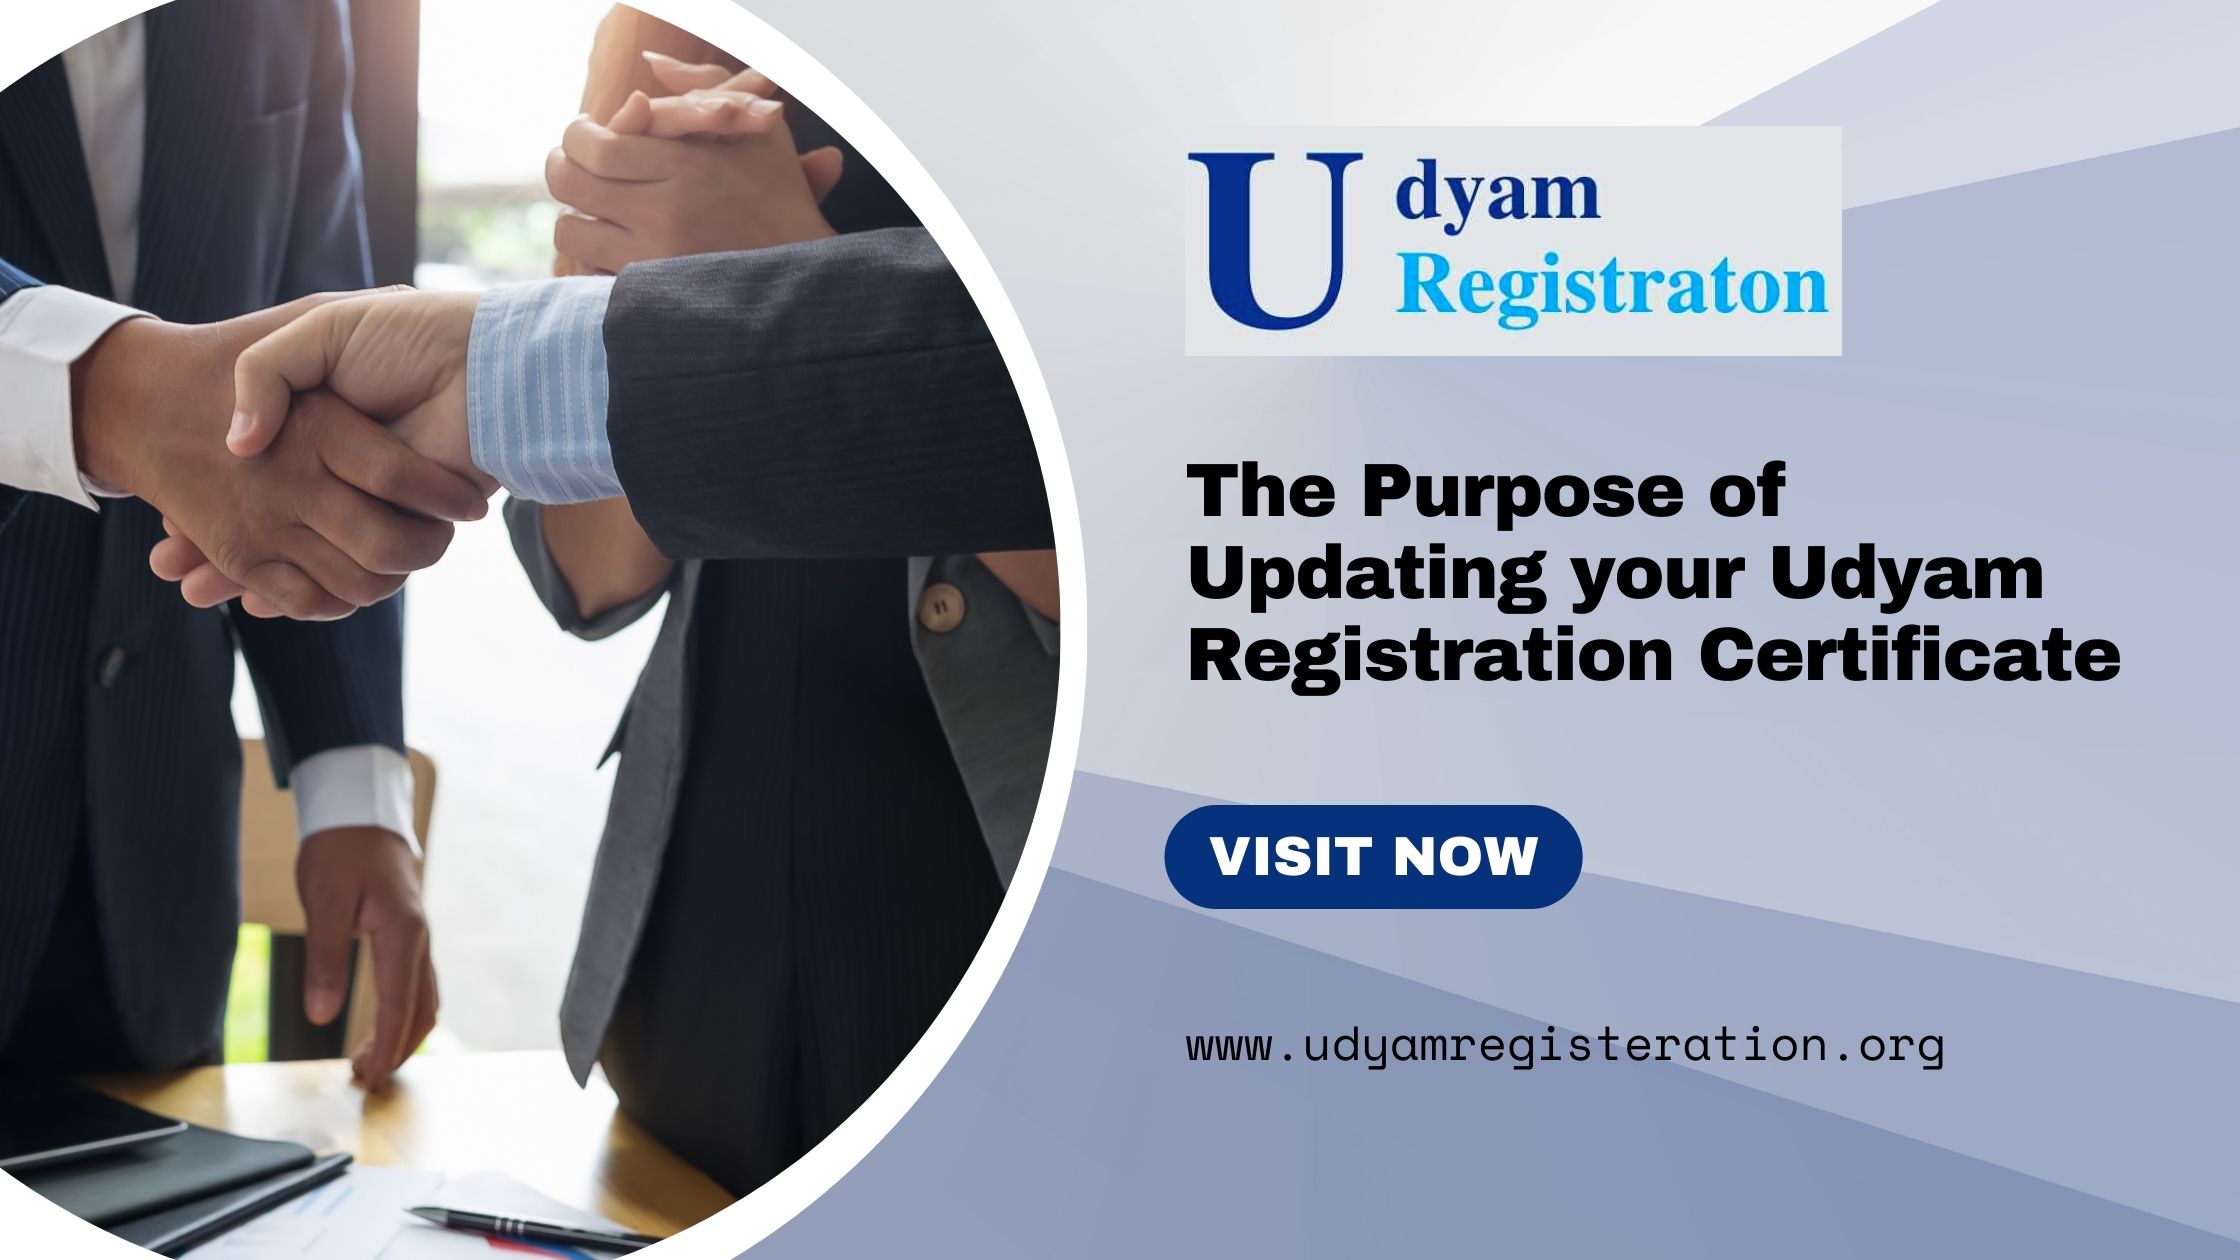 The Purpose of Updating your Udyam Registration Certificate